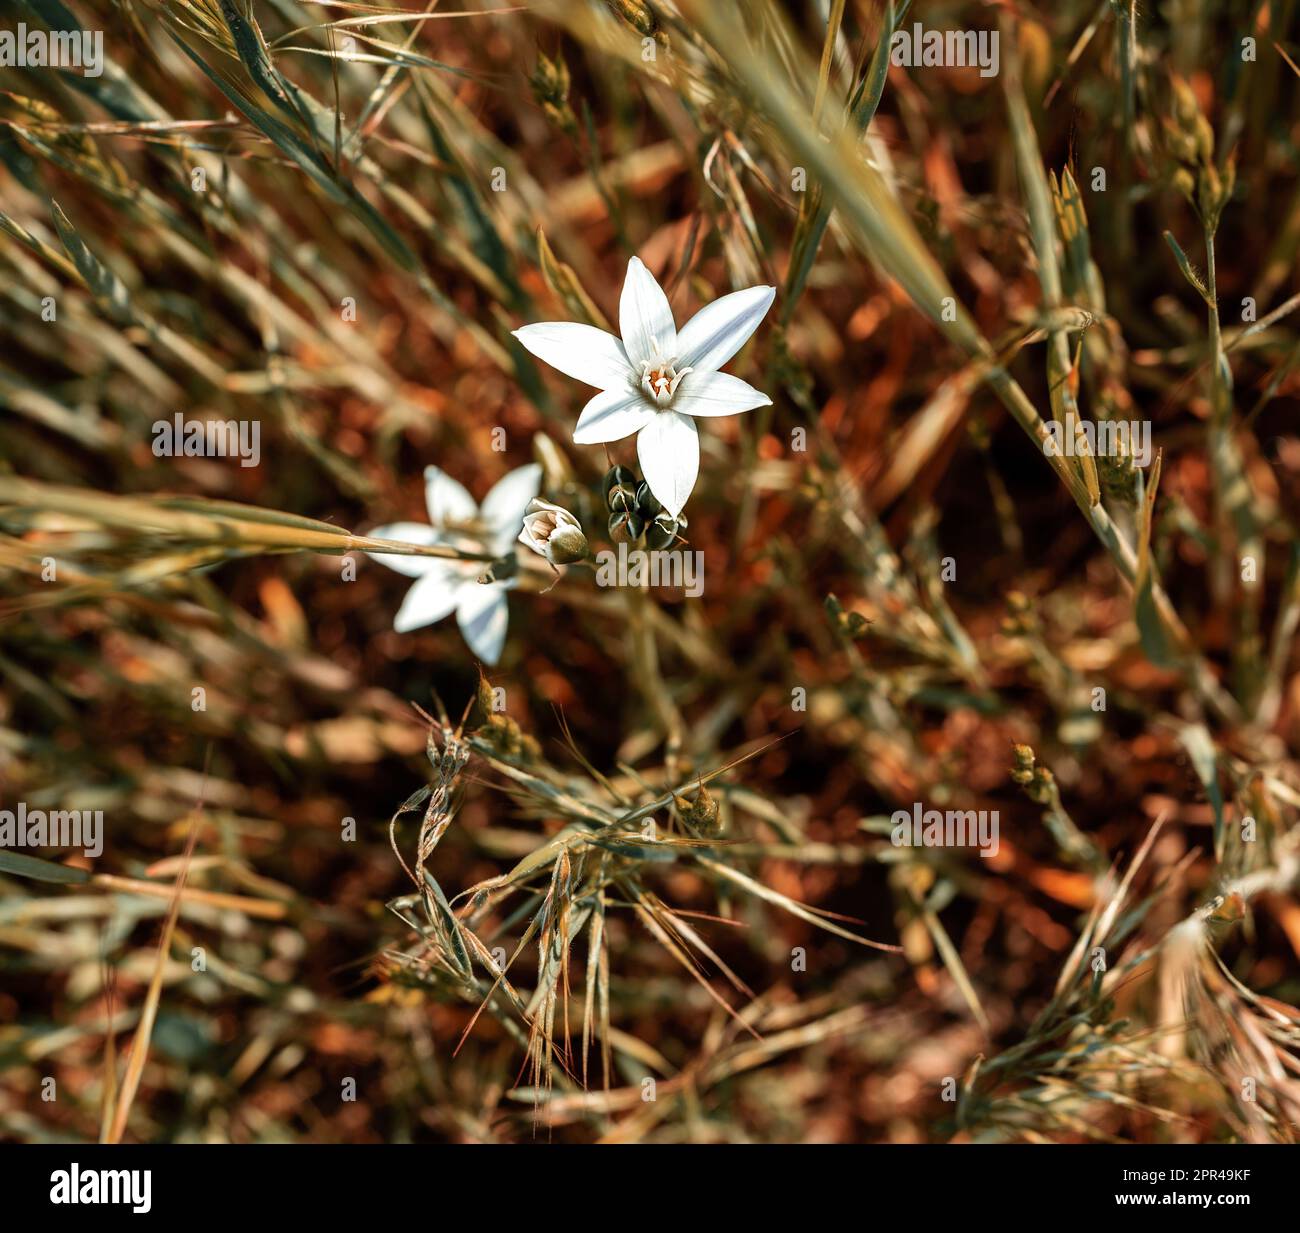 White flower beauty in nature, grass lily, garden star-of-Bethlehem, nap-at-noon, Ornithogalum umbellatum. Stock Photo